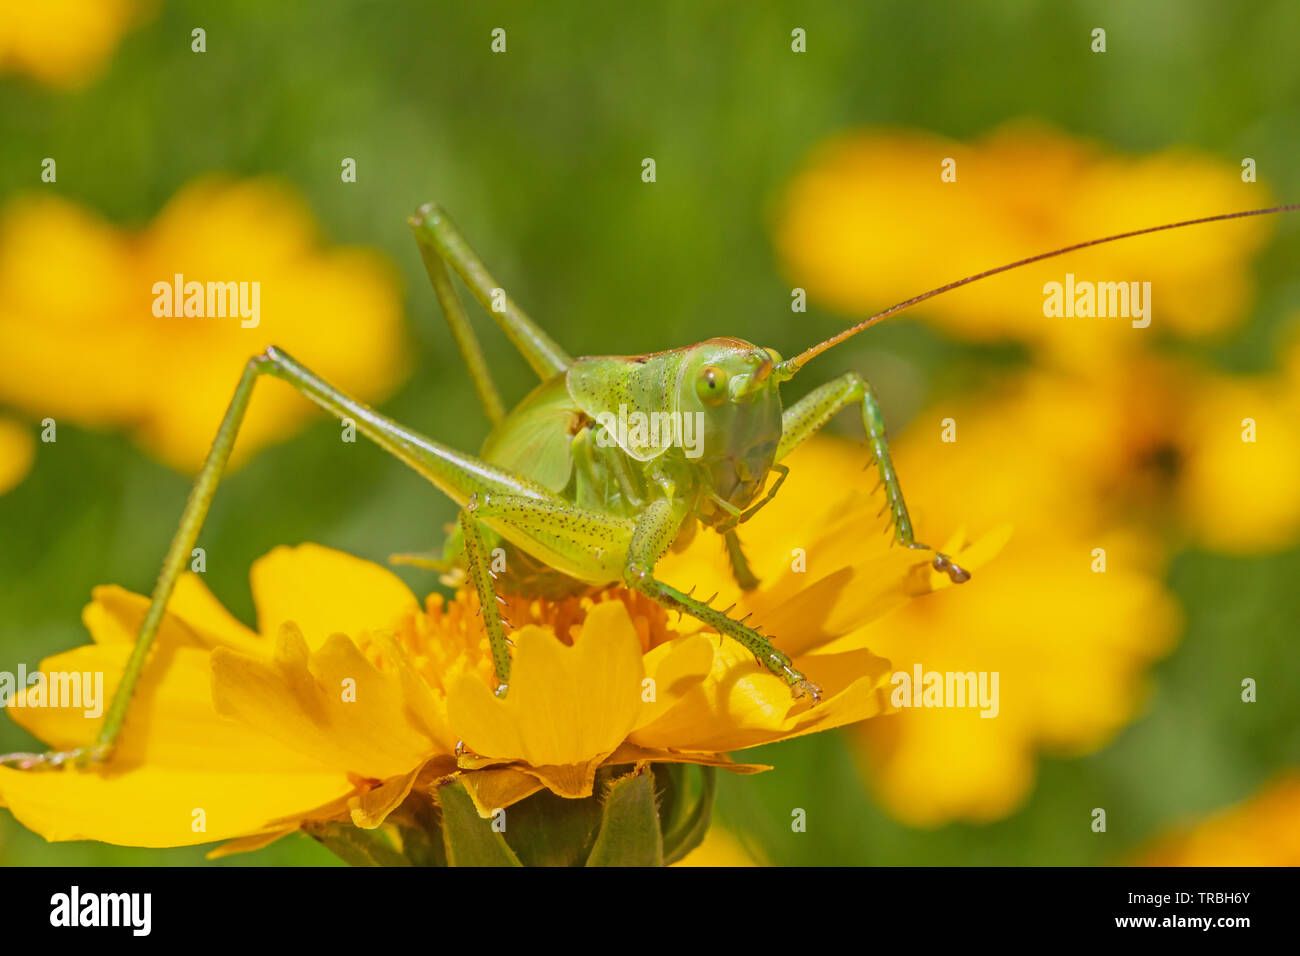 close up of green grasshopper sitting on yellow flower in garden Stock Photo